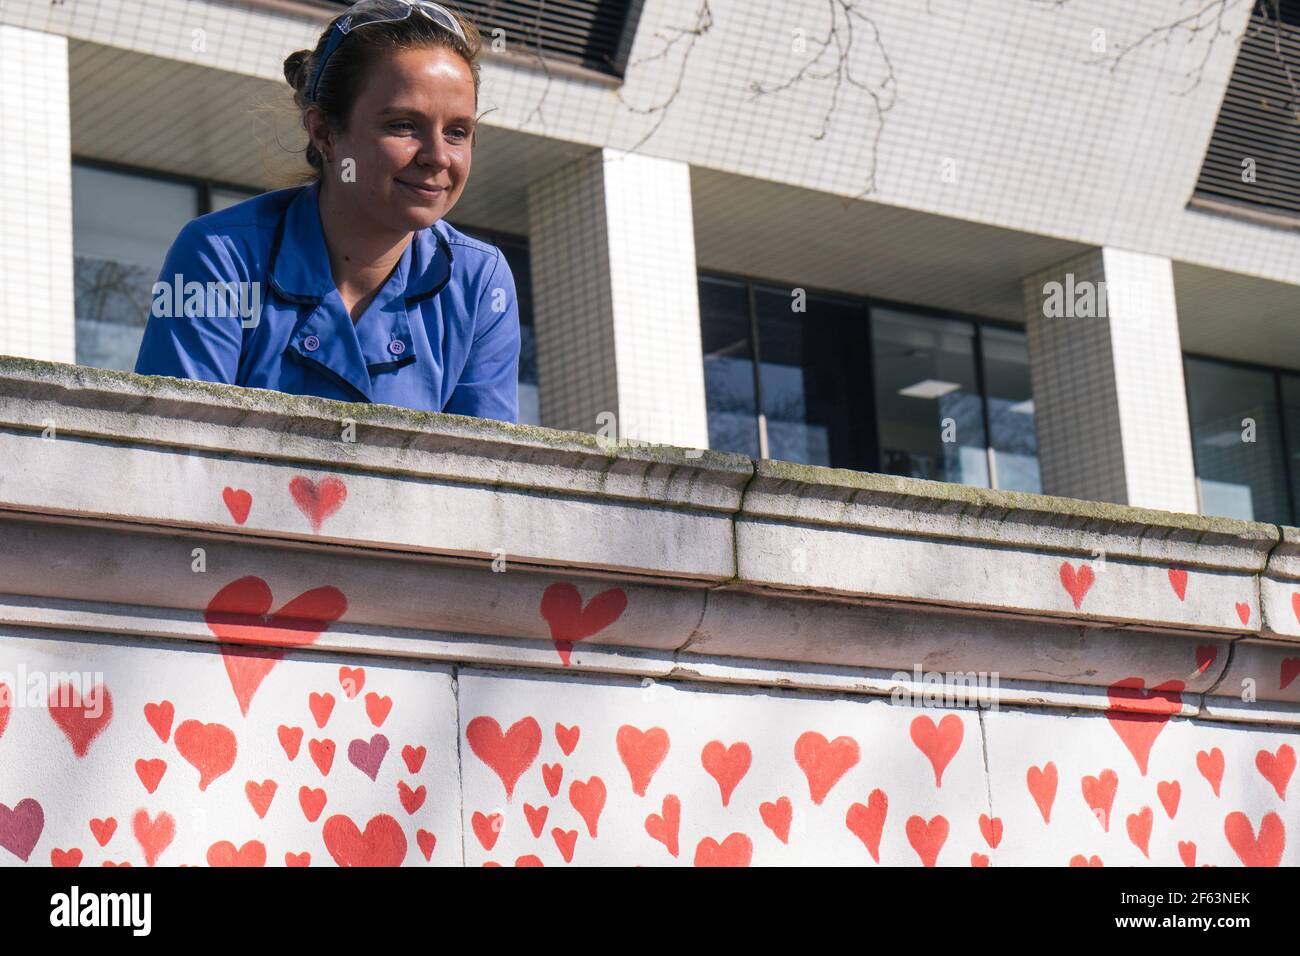 St Thomas's Hospital, London, UK. 29th March 2021. The bereaved and volunteers paint hearts for each person who has died of Covid. Medical staff from the hospital sit and look over the wall at the work. Credit: Denise Laura Baker/Alamy Live News Stock Photo